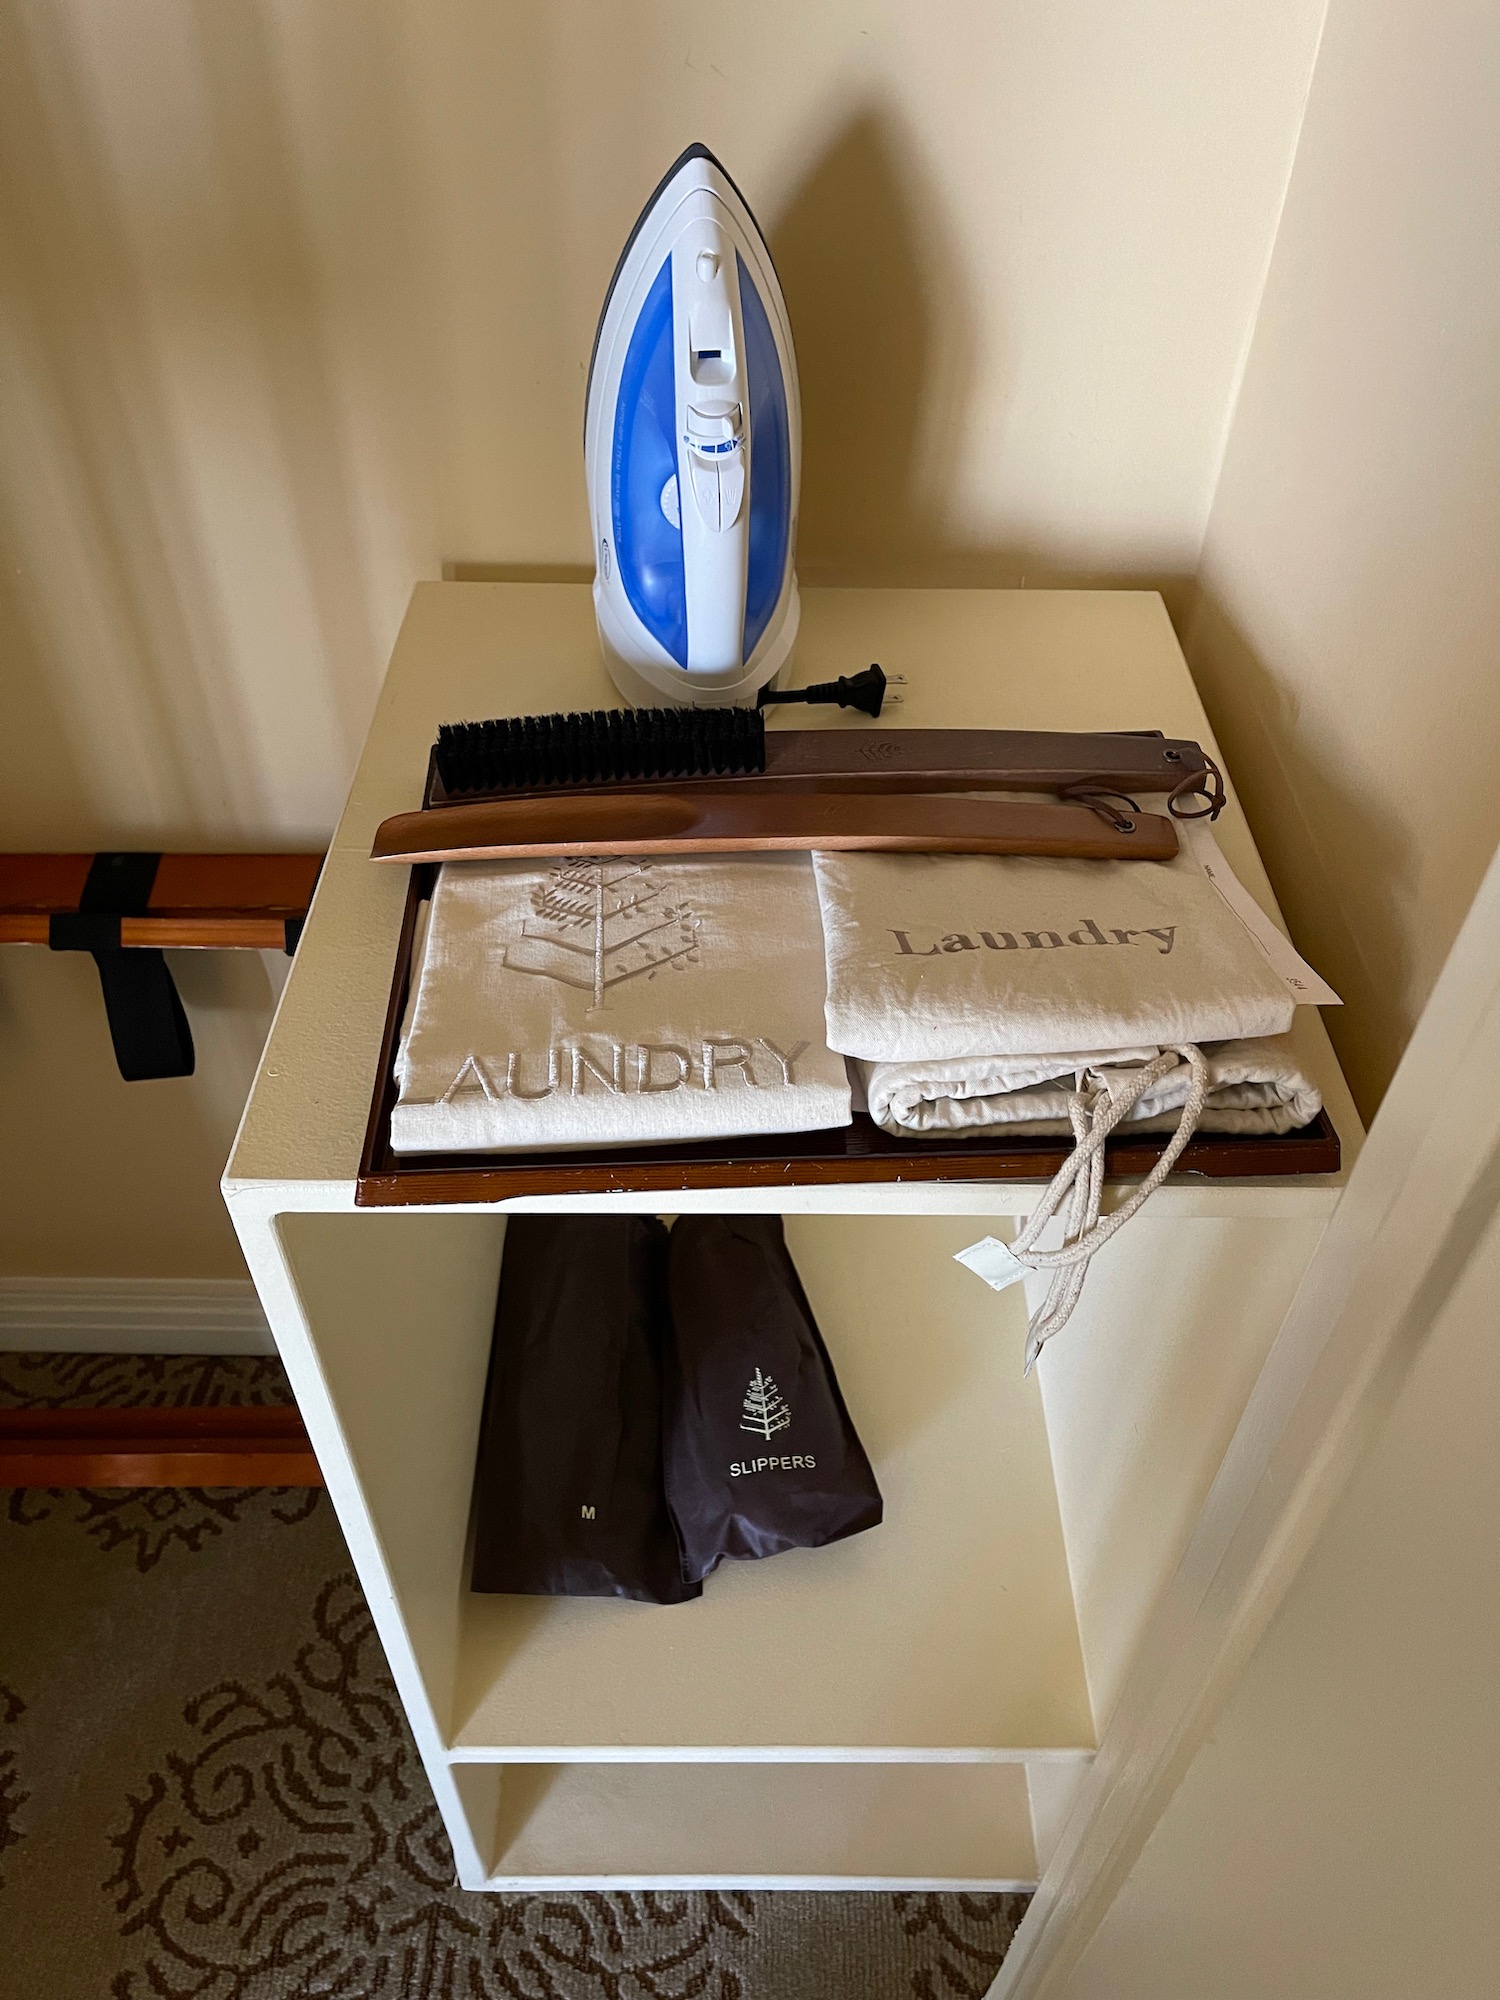 a iron and towels on a shelf